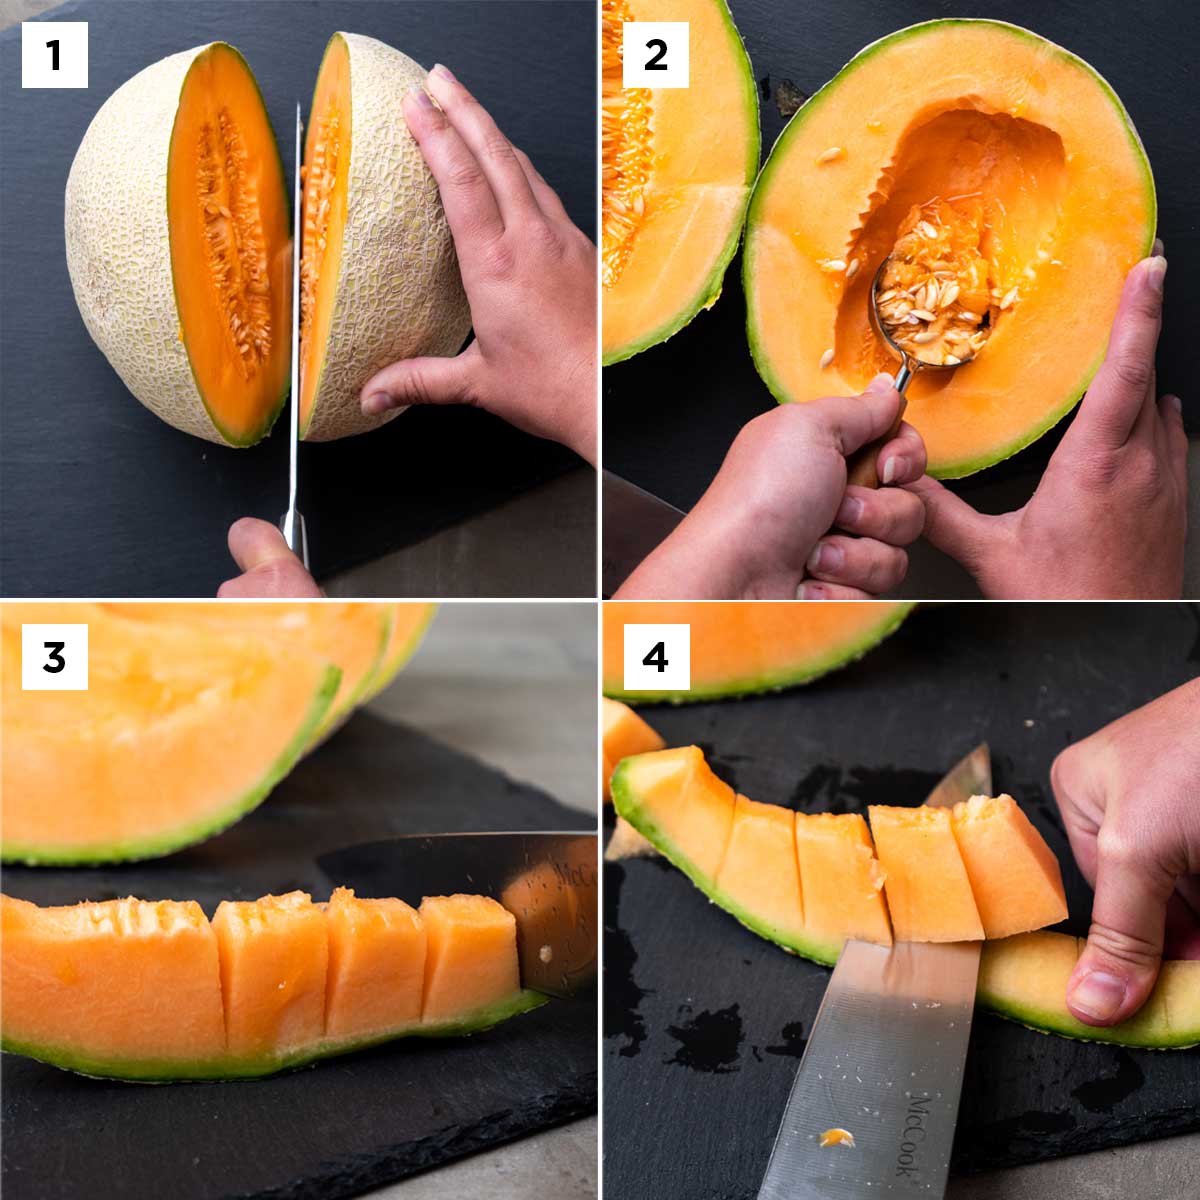 4 photos showing how to cut a cantaloupe: cut it in half long ways, then scoop out the seeds. Slice into wedges then dice off the rind.